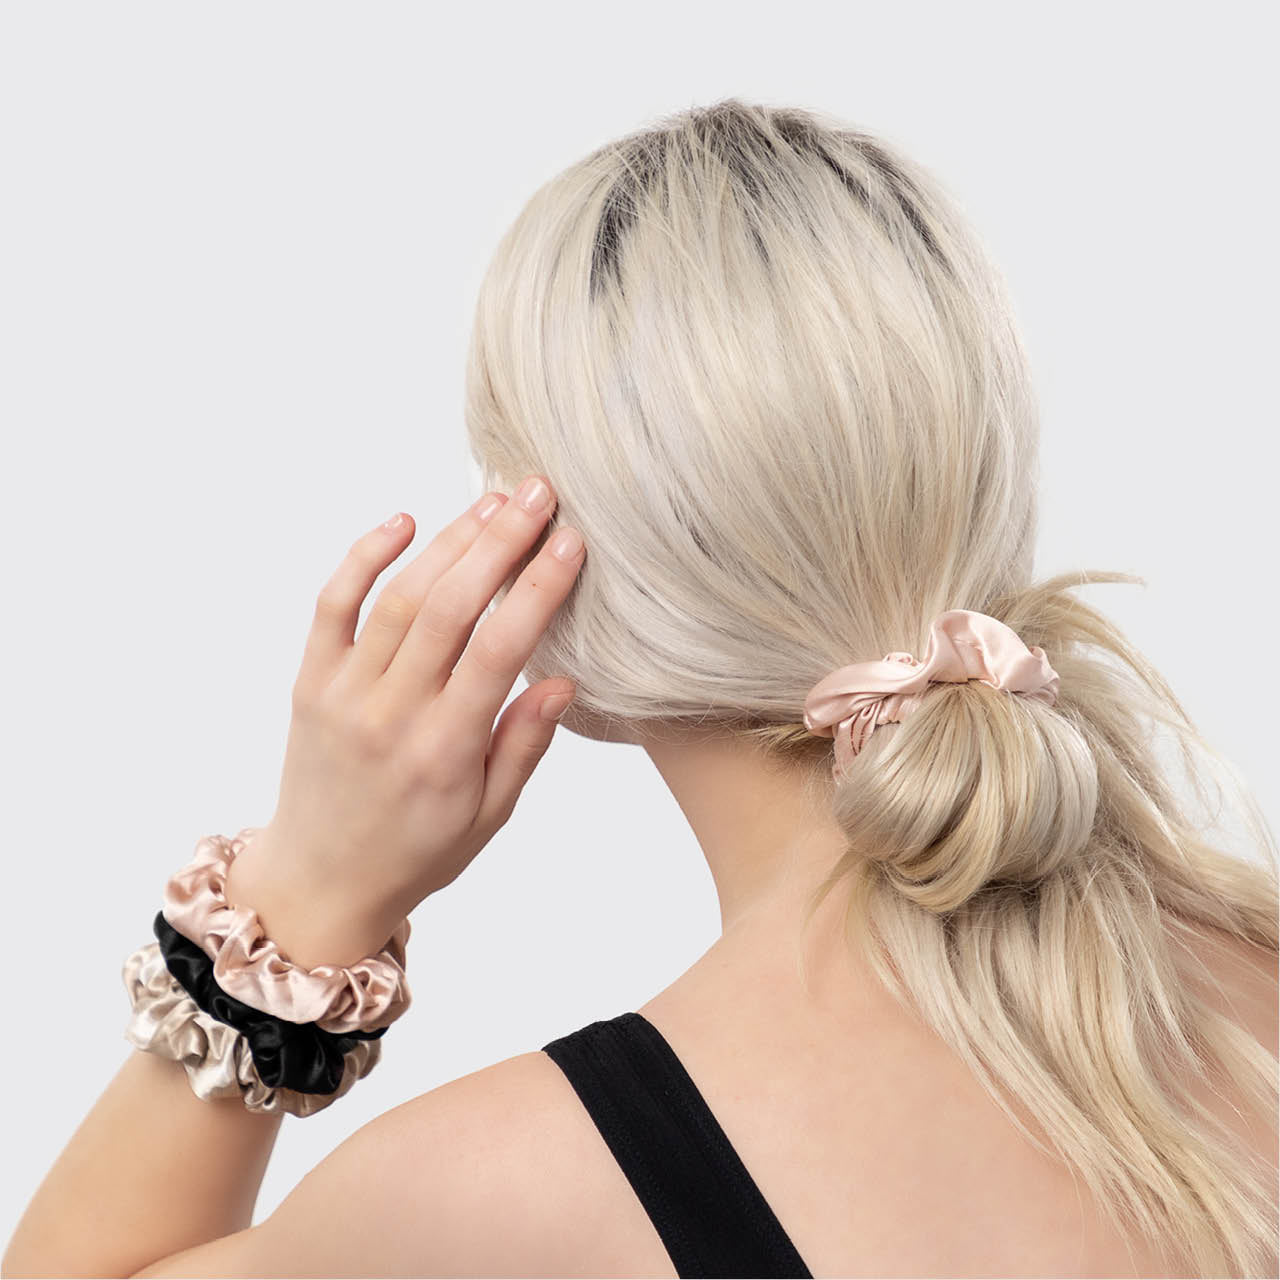 Assorted Satin Scrunchies - Your Hair in Style - Free over $35 – KITSCH